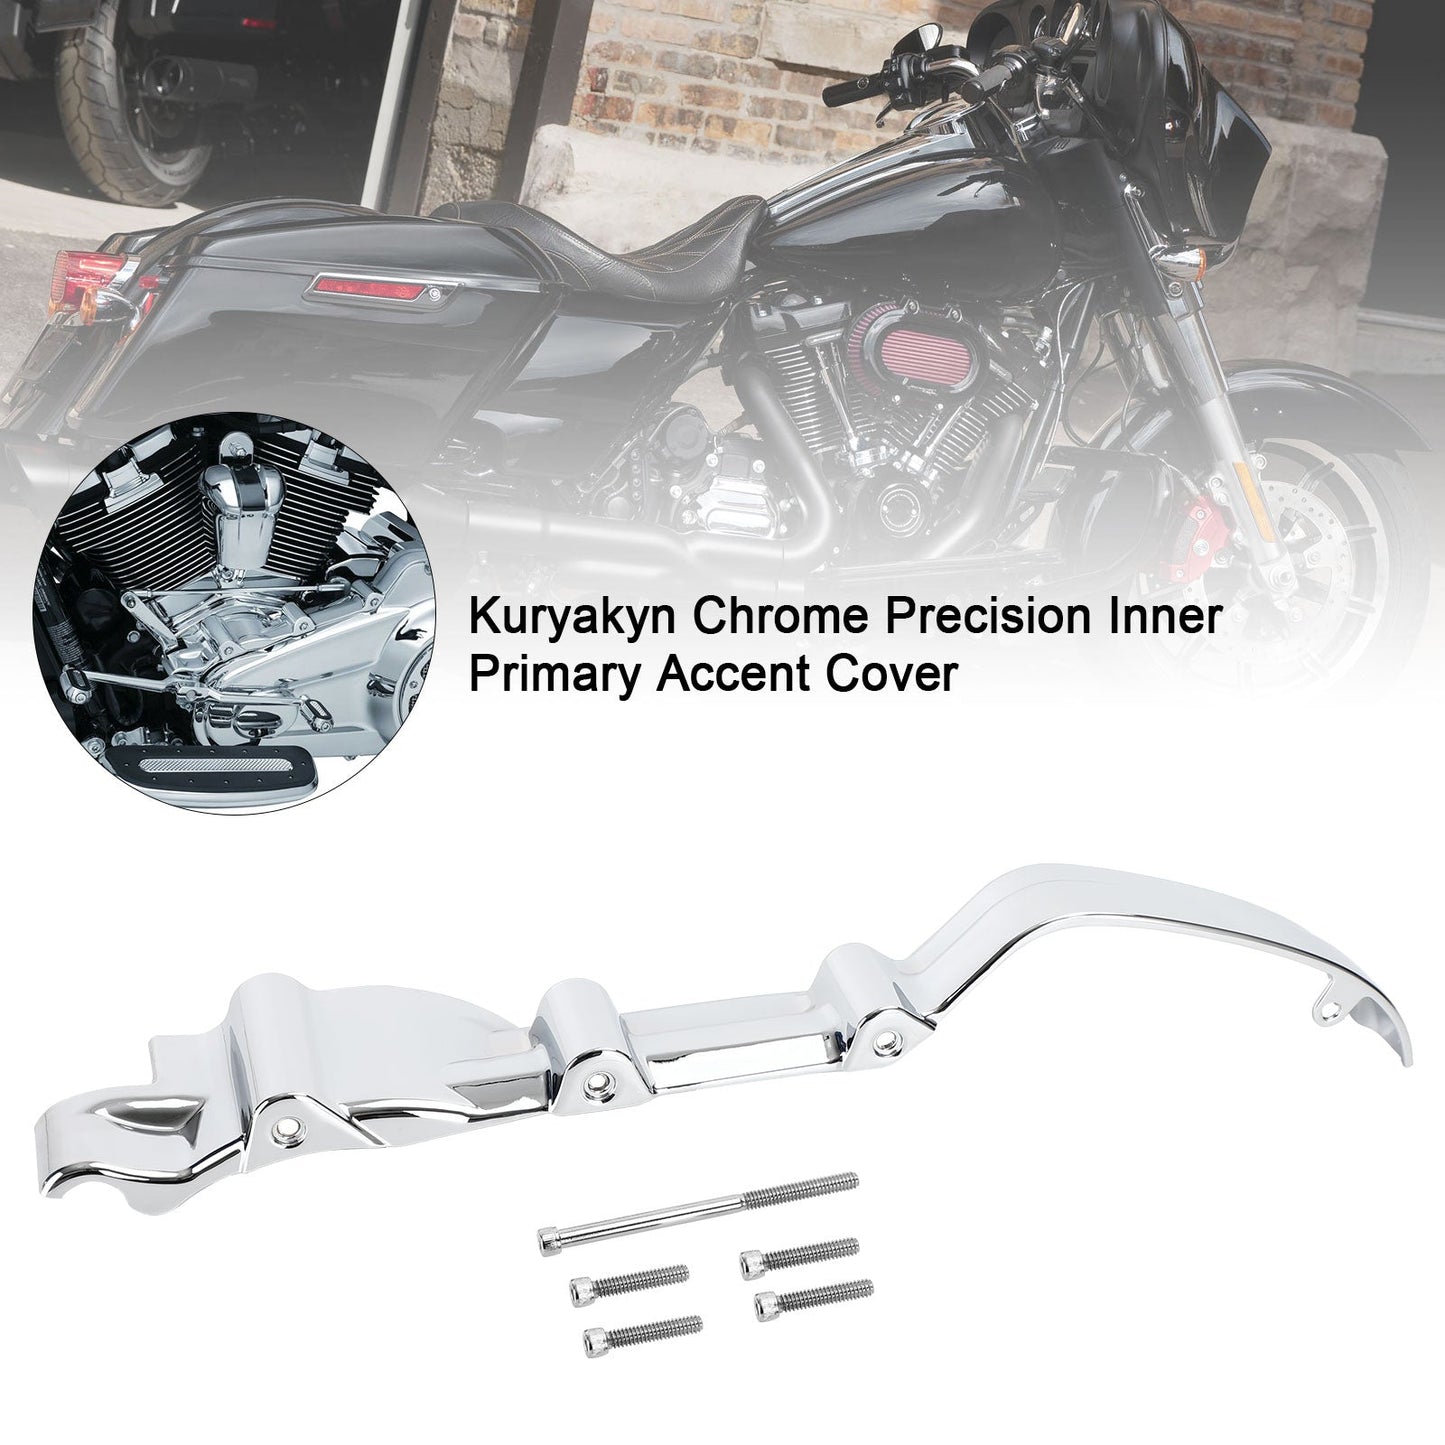 Kuryakyn Chrome Precision Inner Primary Accent Cover For Milwaukee M8 2017-2020